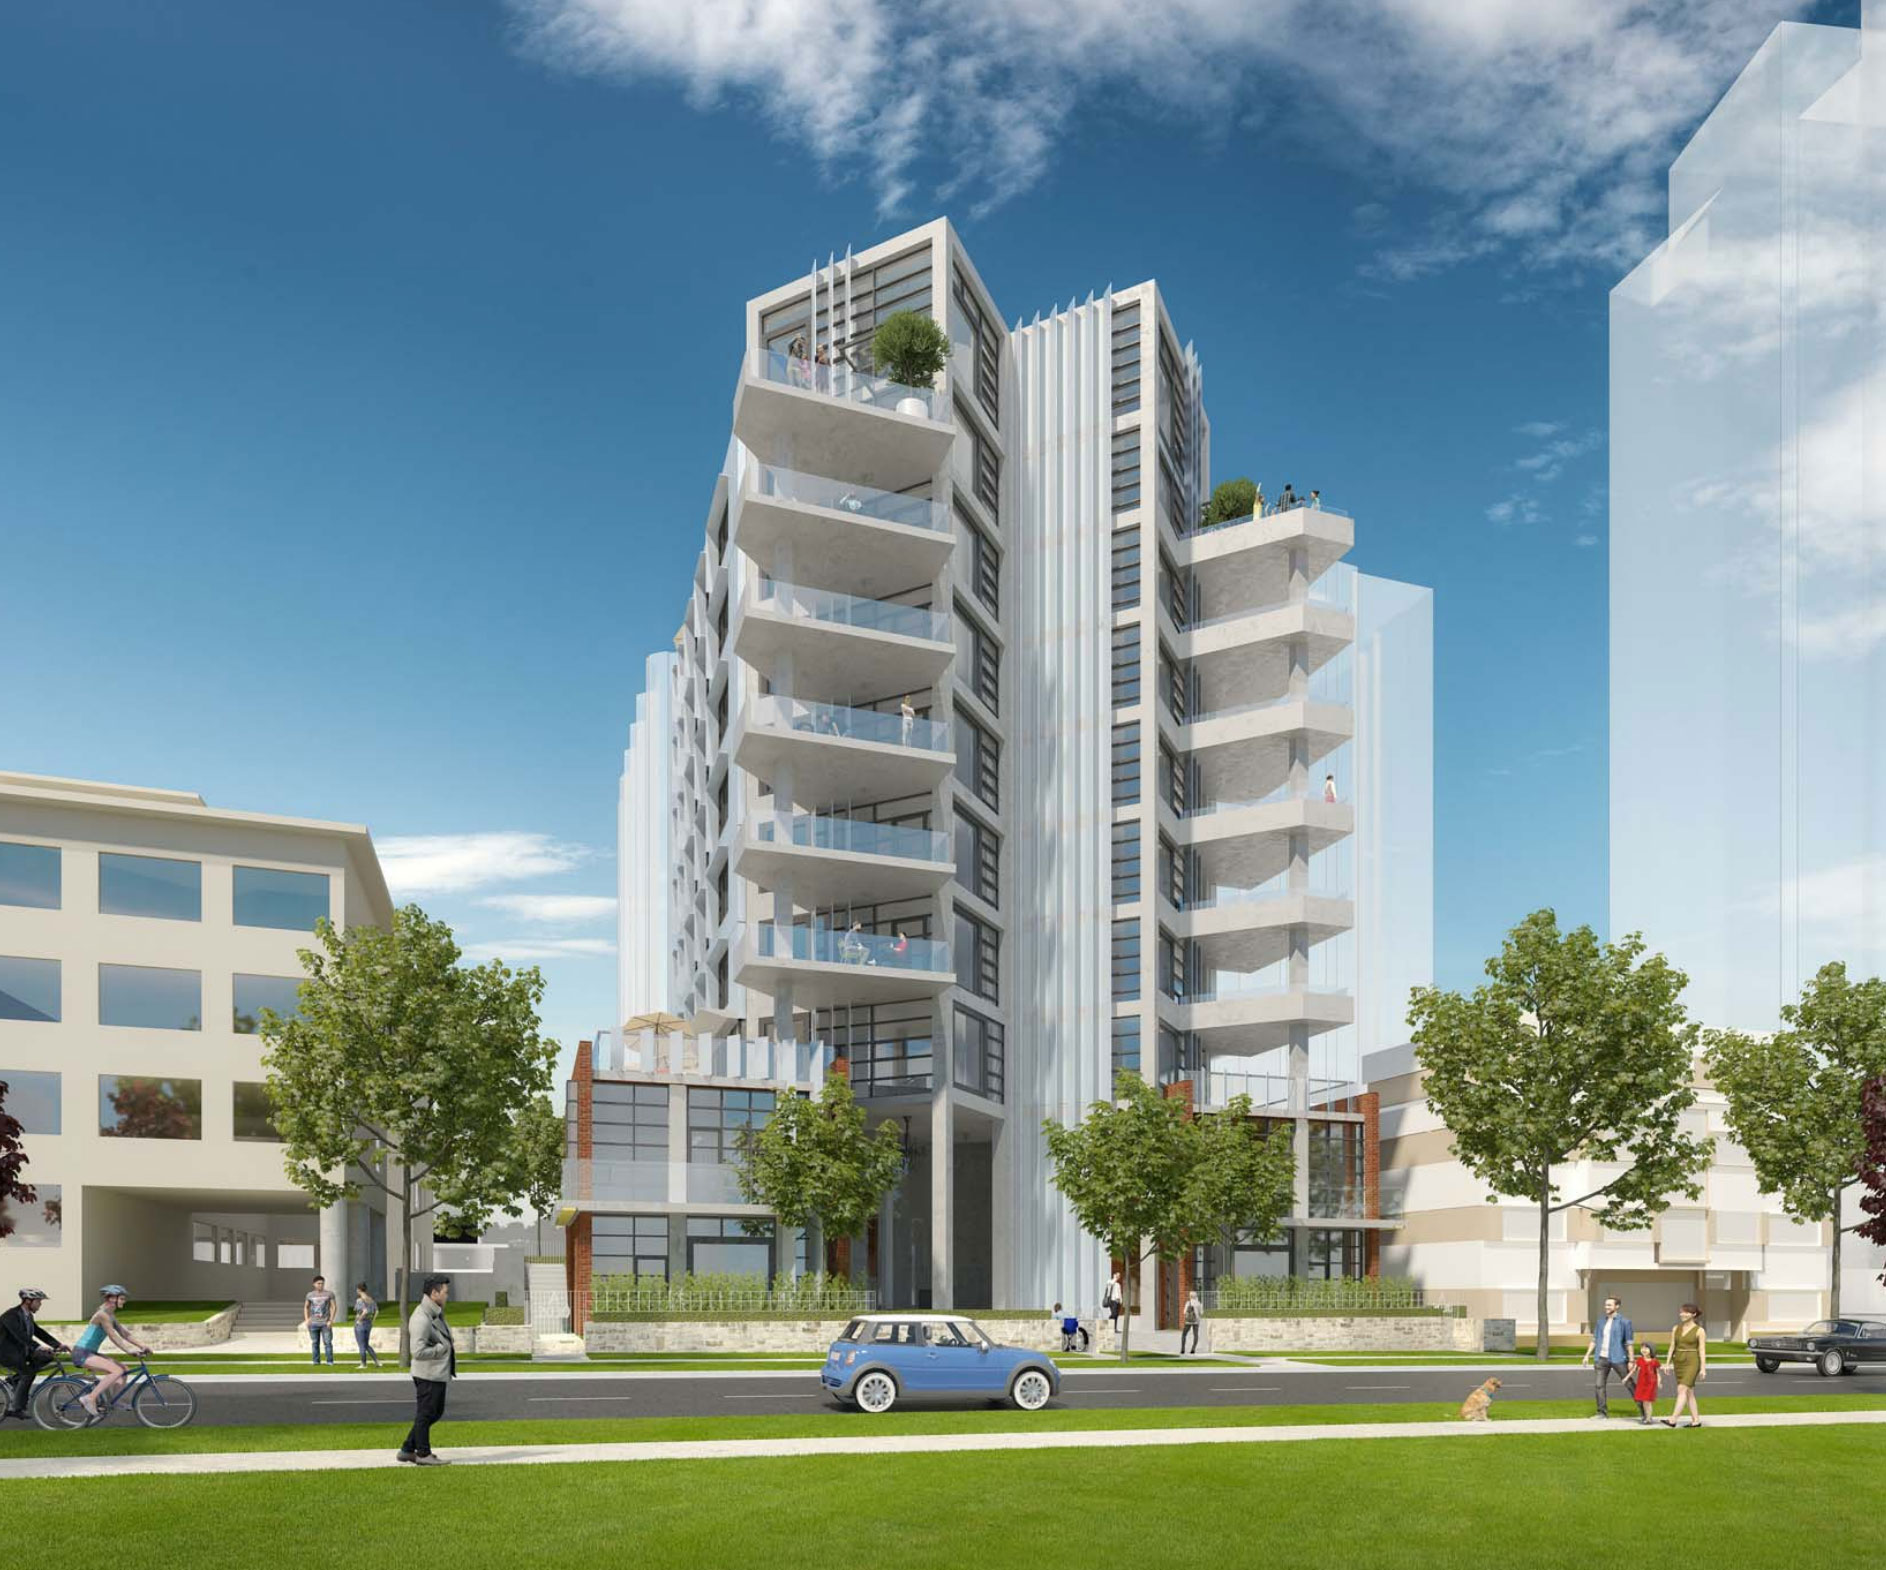 Coming soon to downtown Vancouver, family-oriented homes from Marcon Development.